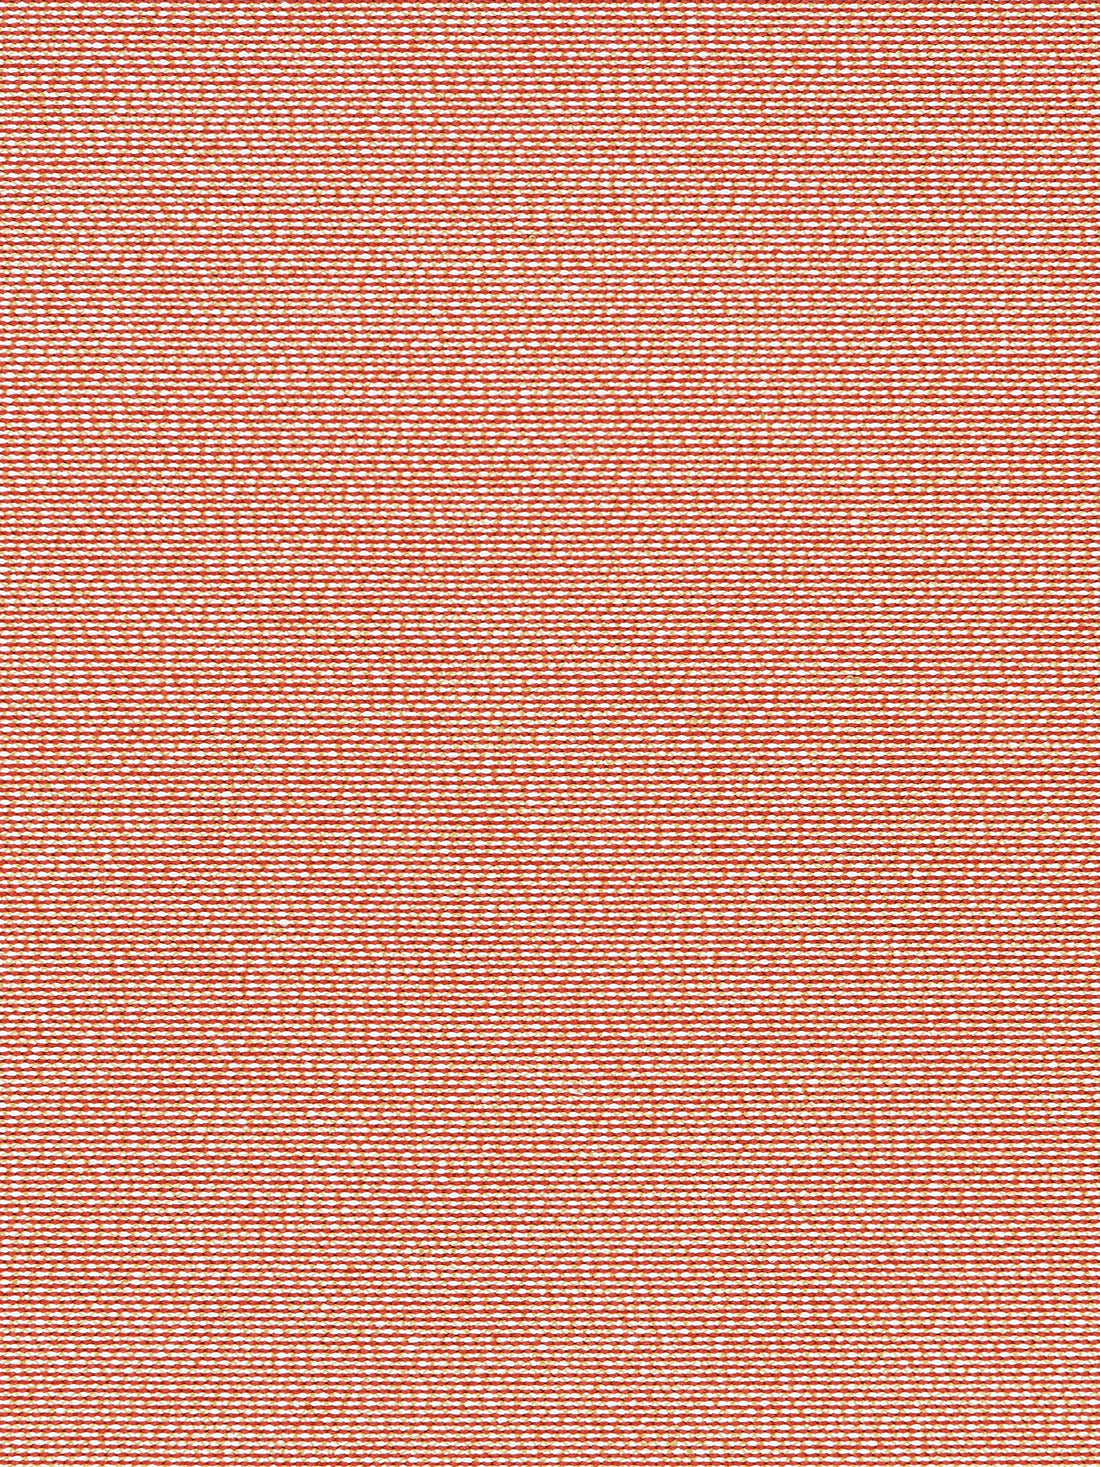 Arena Beach fabric in terra cotta color - pattern number EA 00026003 - by Scalamandre in the Old World Weavers collection